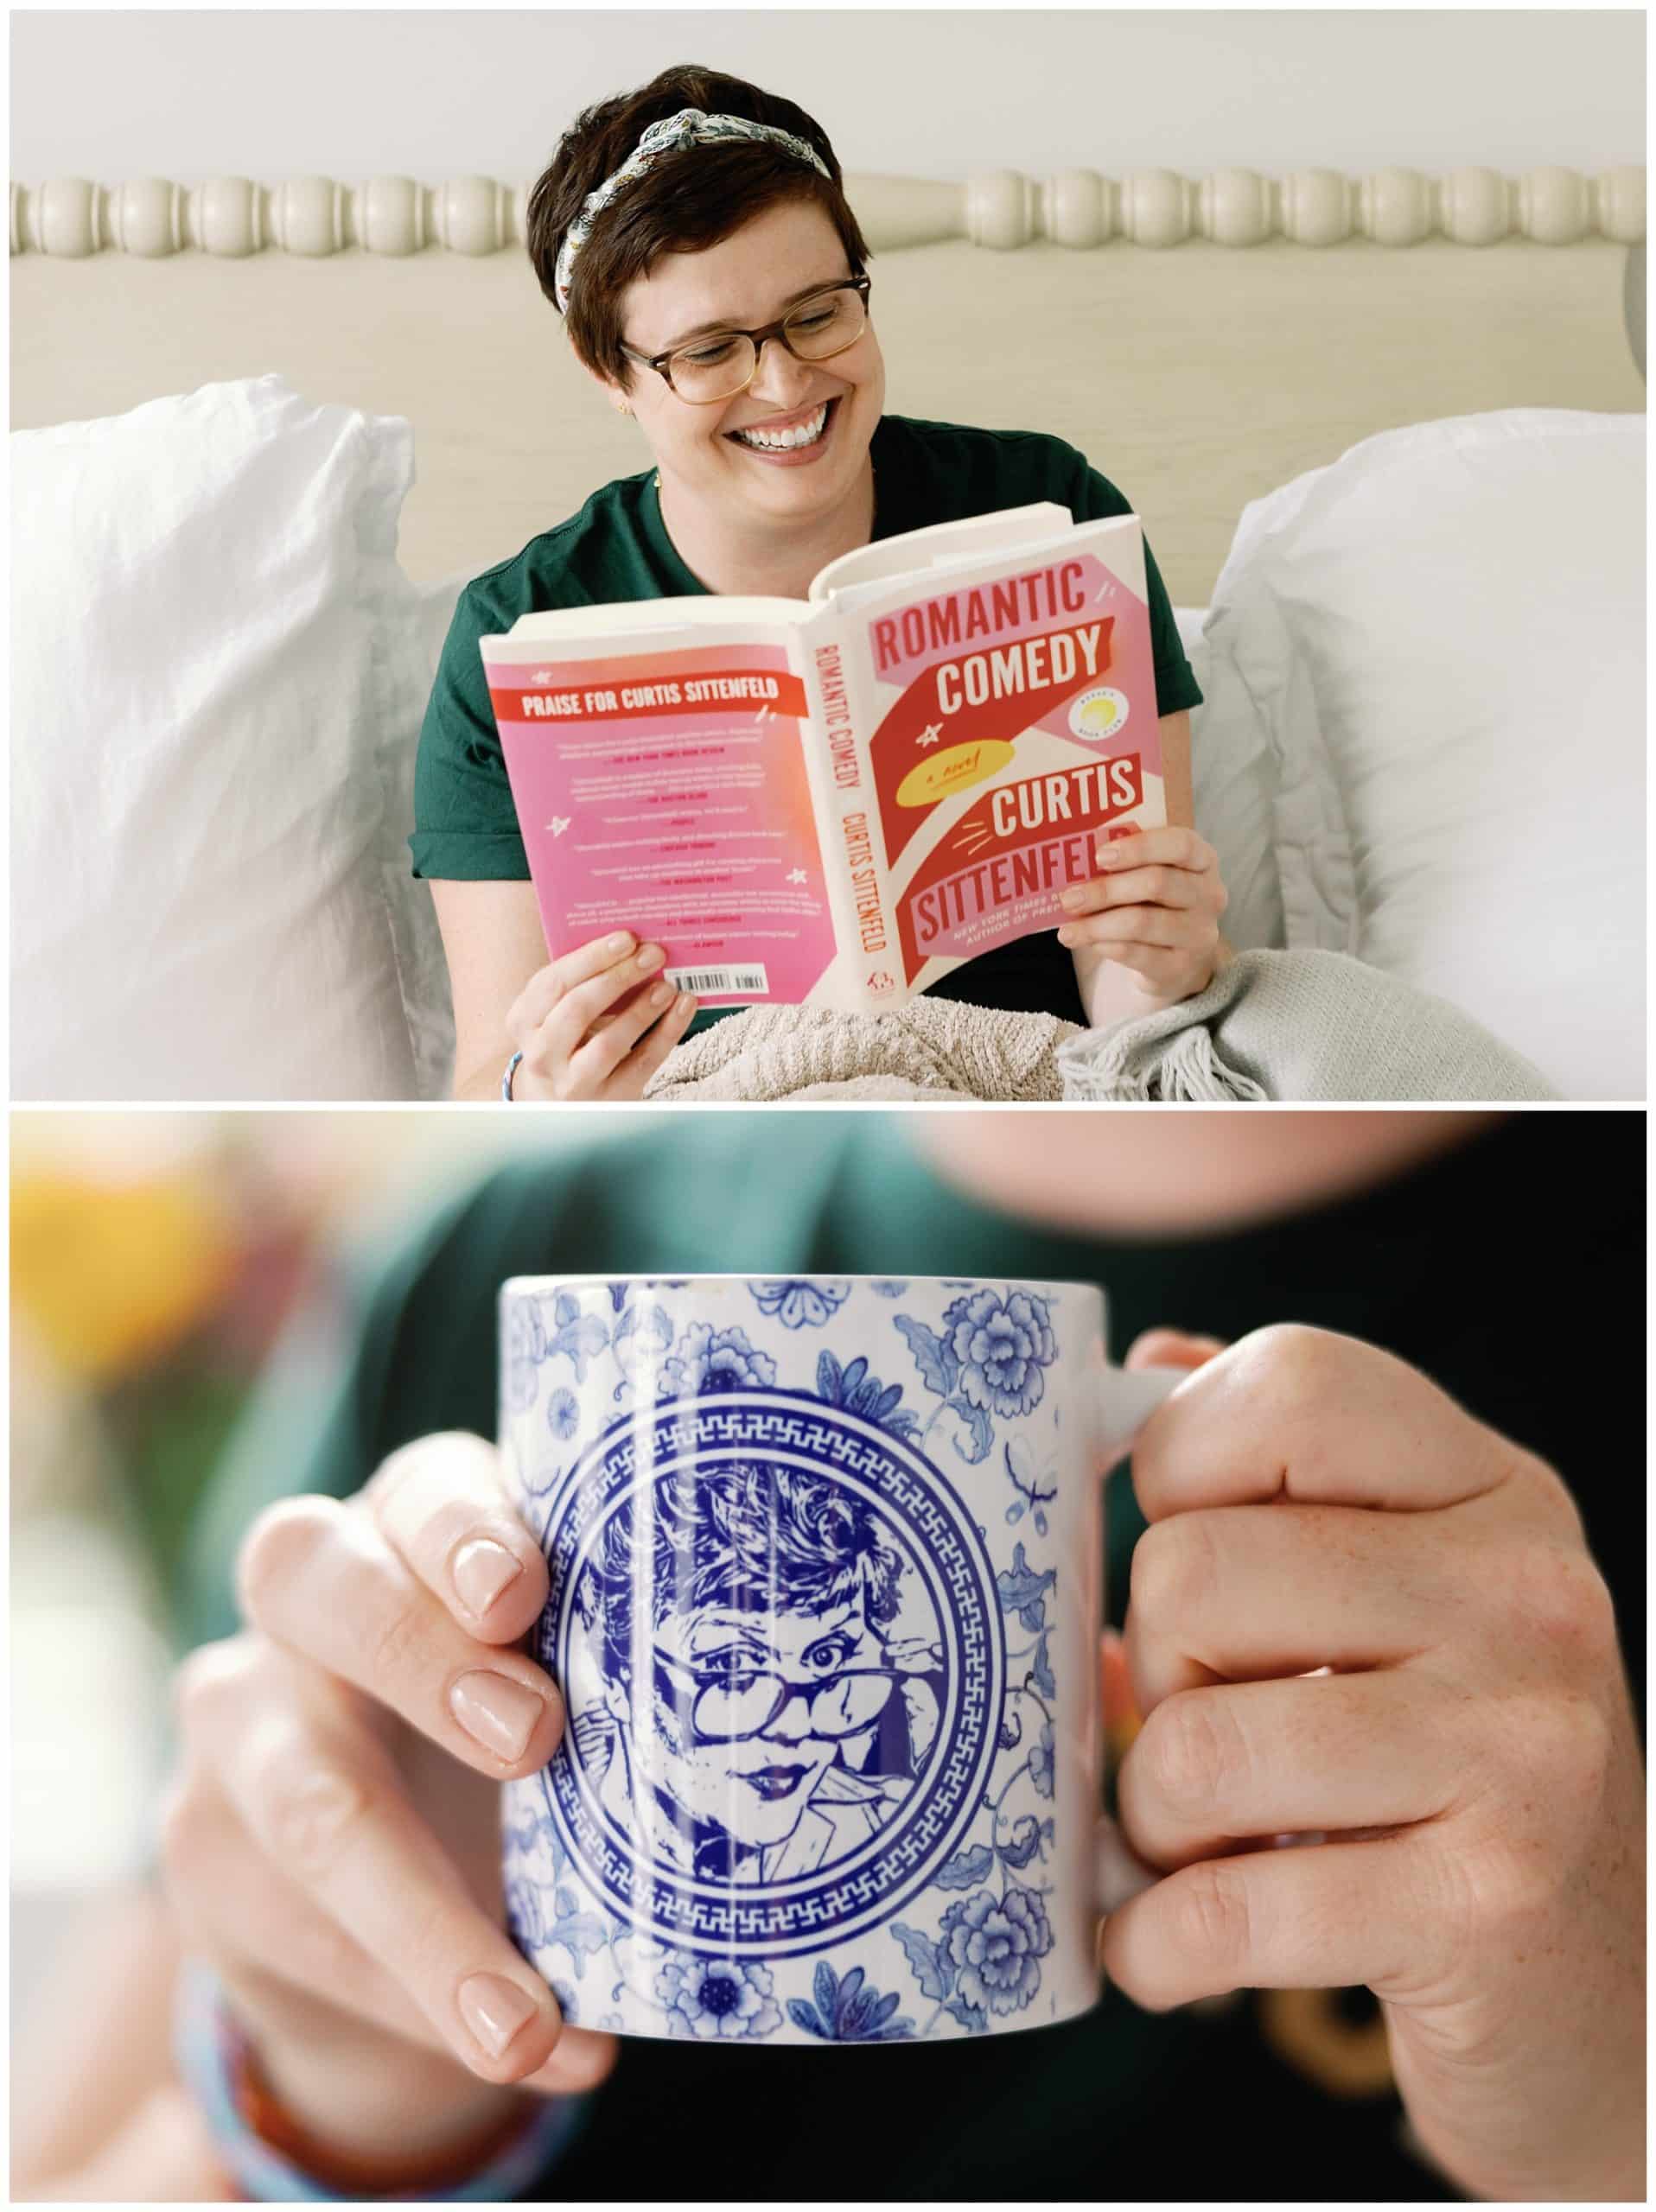 Two pictures of a woman reading a book and holding a coffee mug.